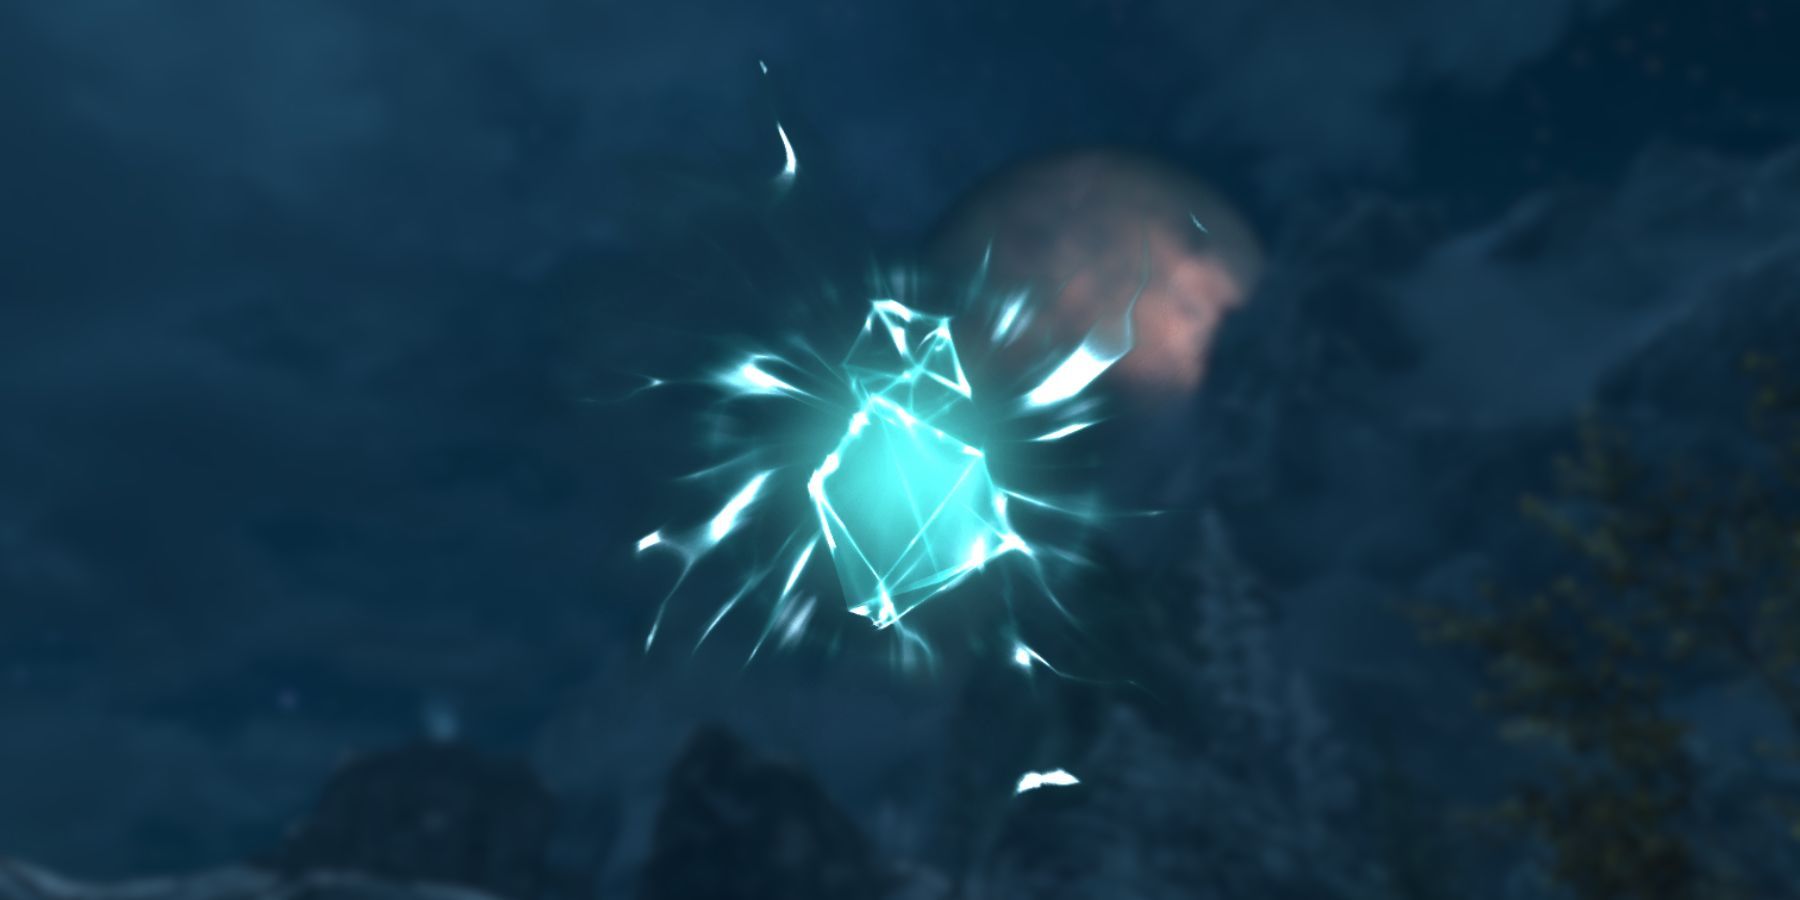 Skyrim: How to Find and Use Transmute Spell